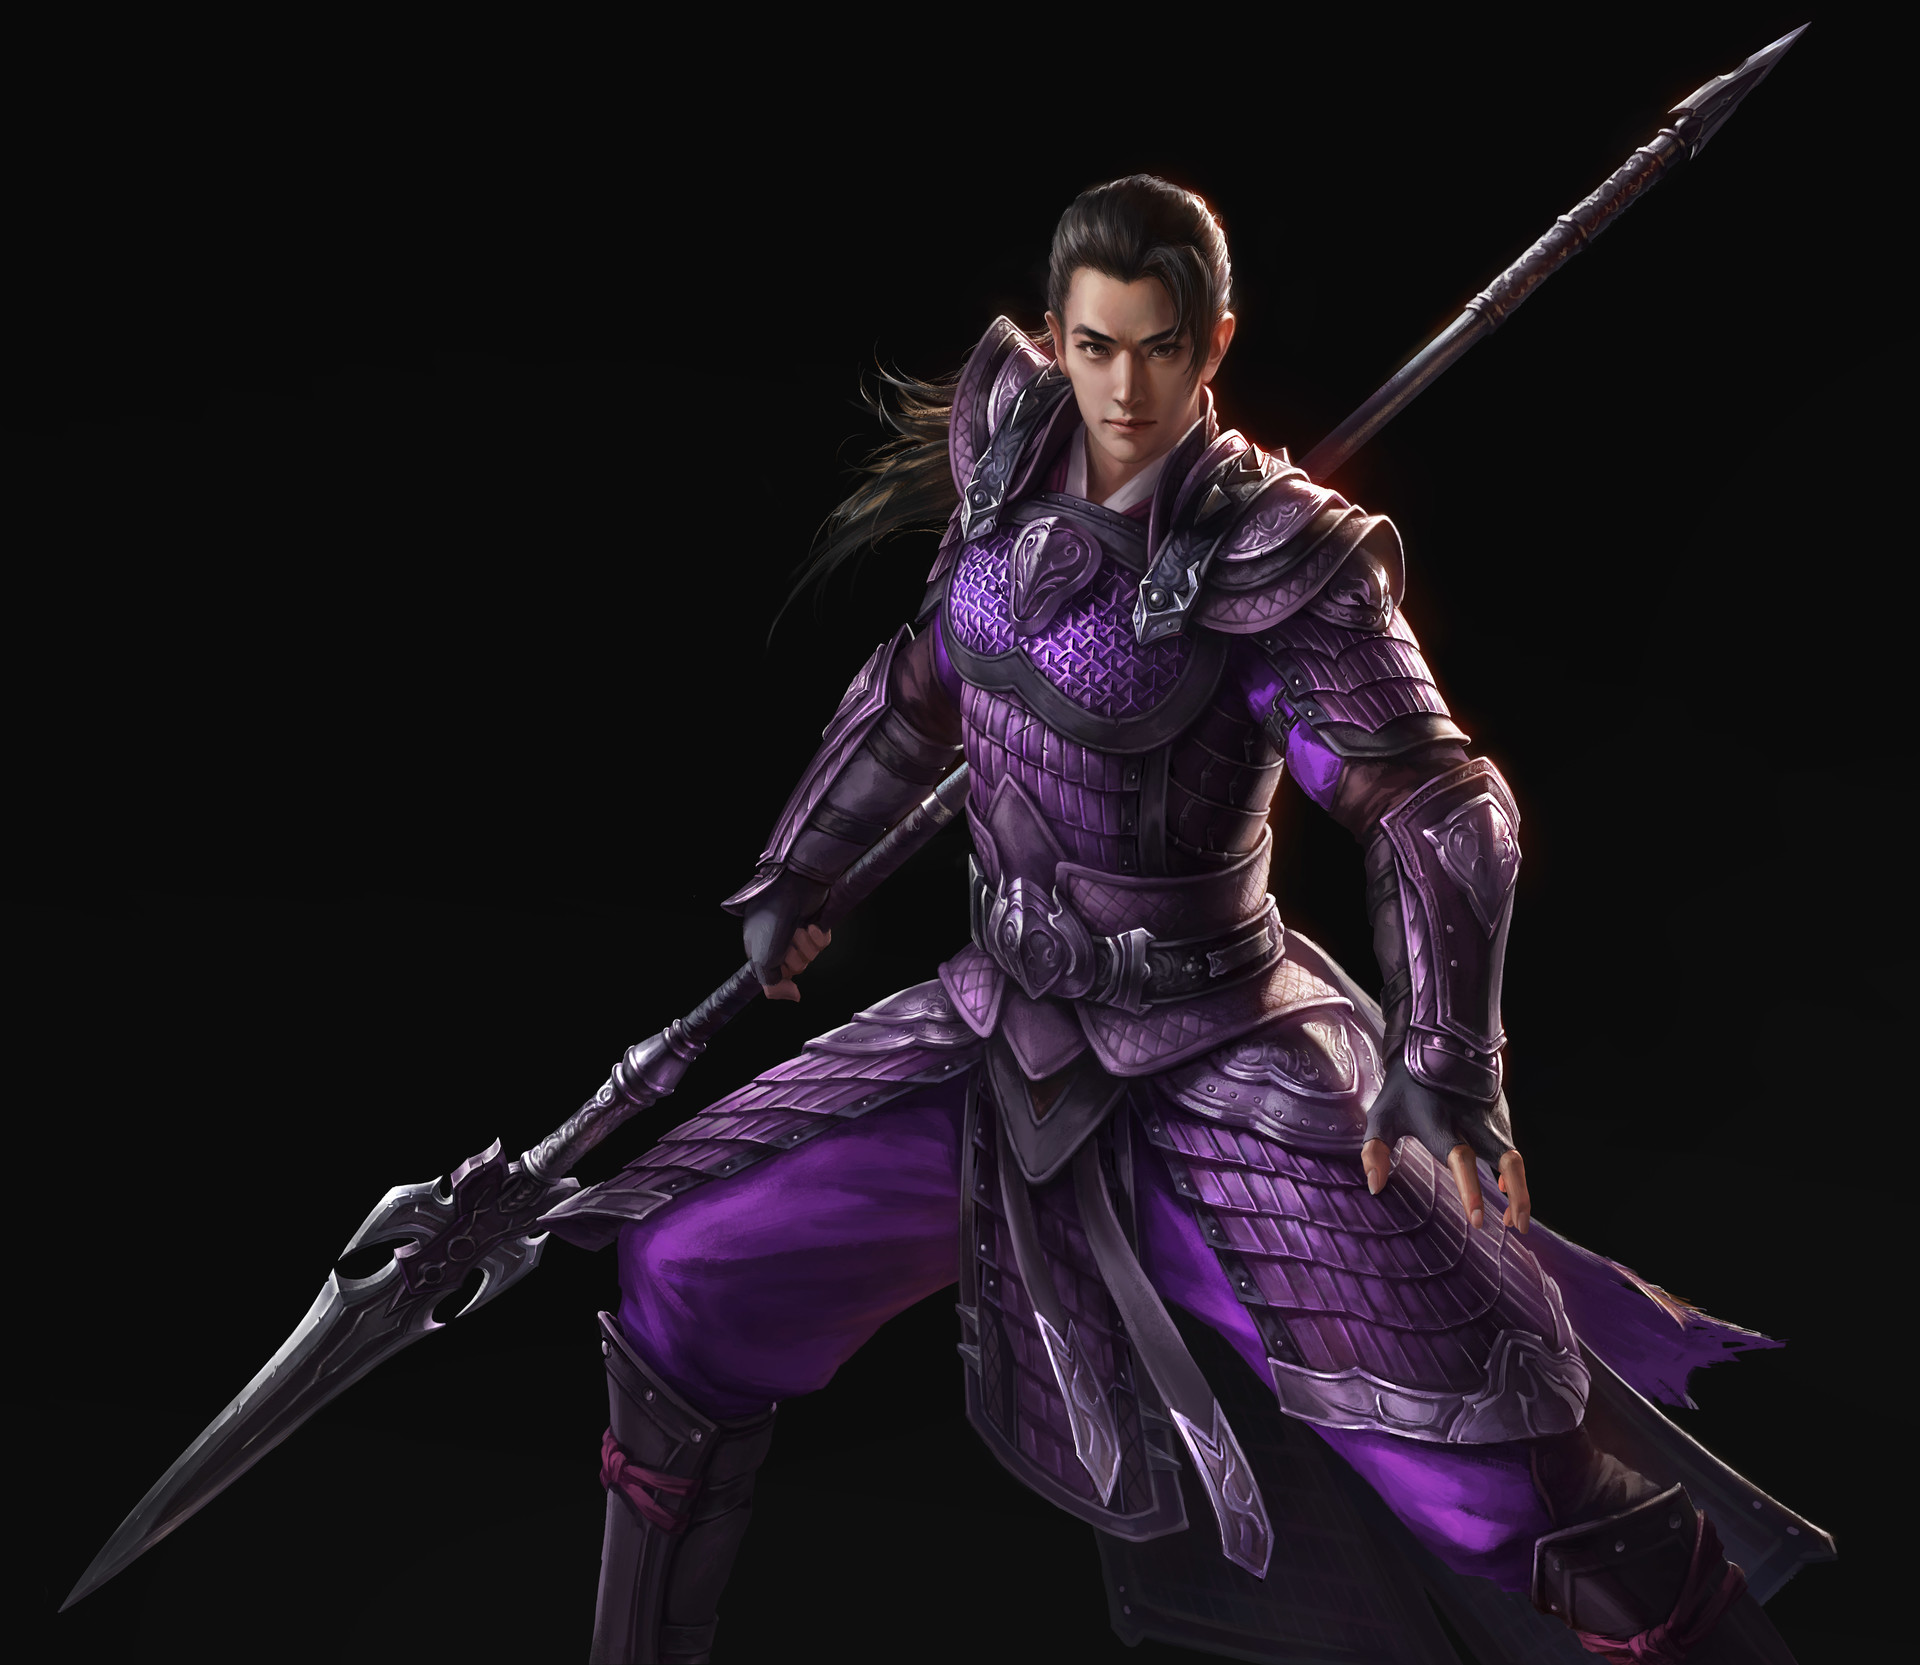 General 1920x1665 drawing men warrior brunette long hair armor purple clothing gloves weapon spear simple background black background